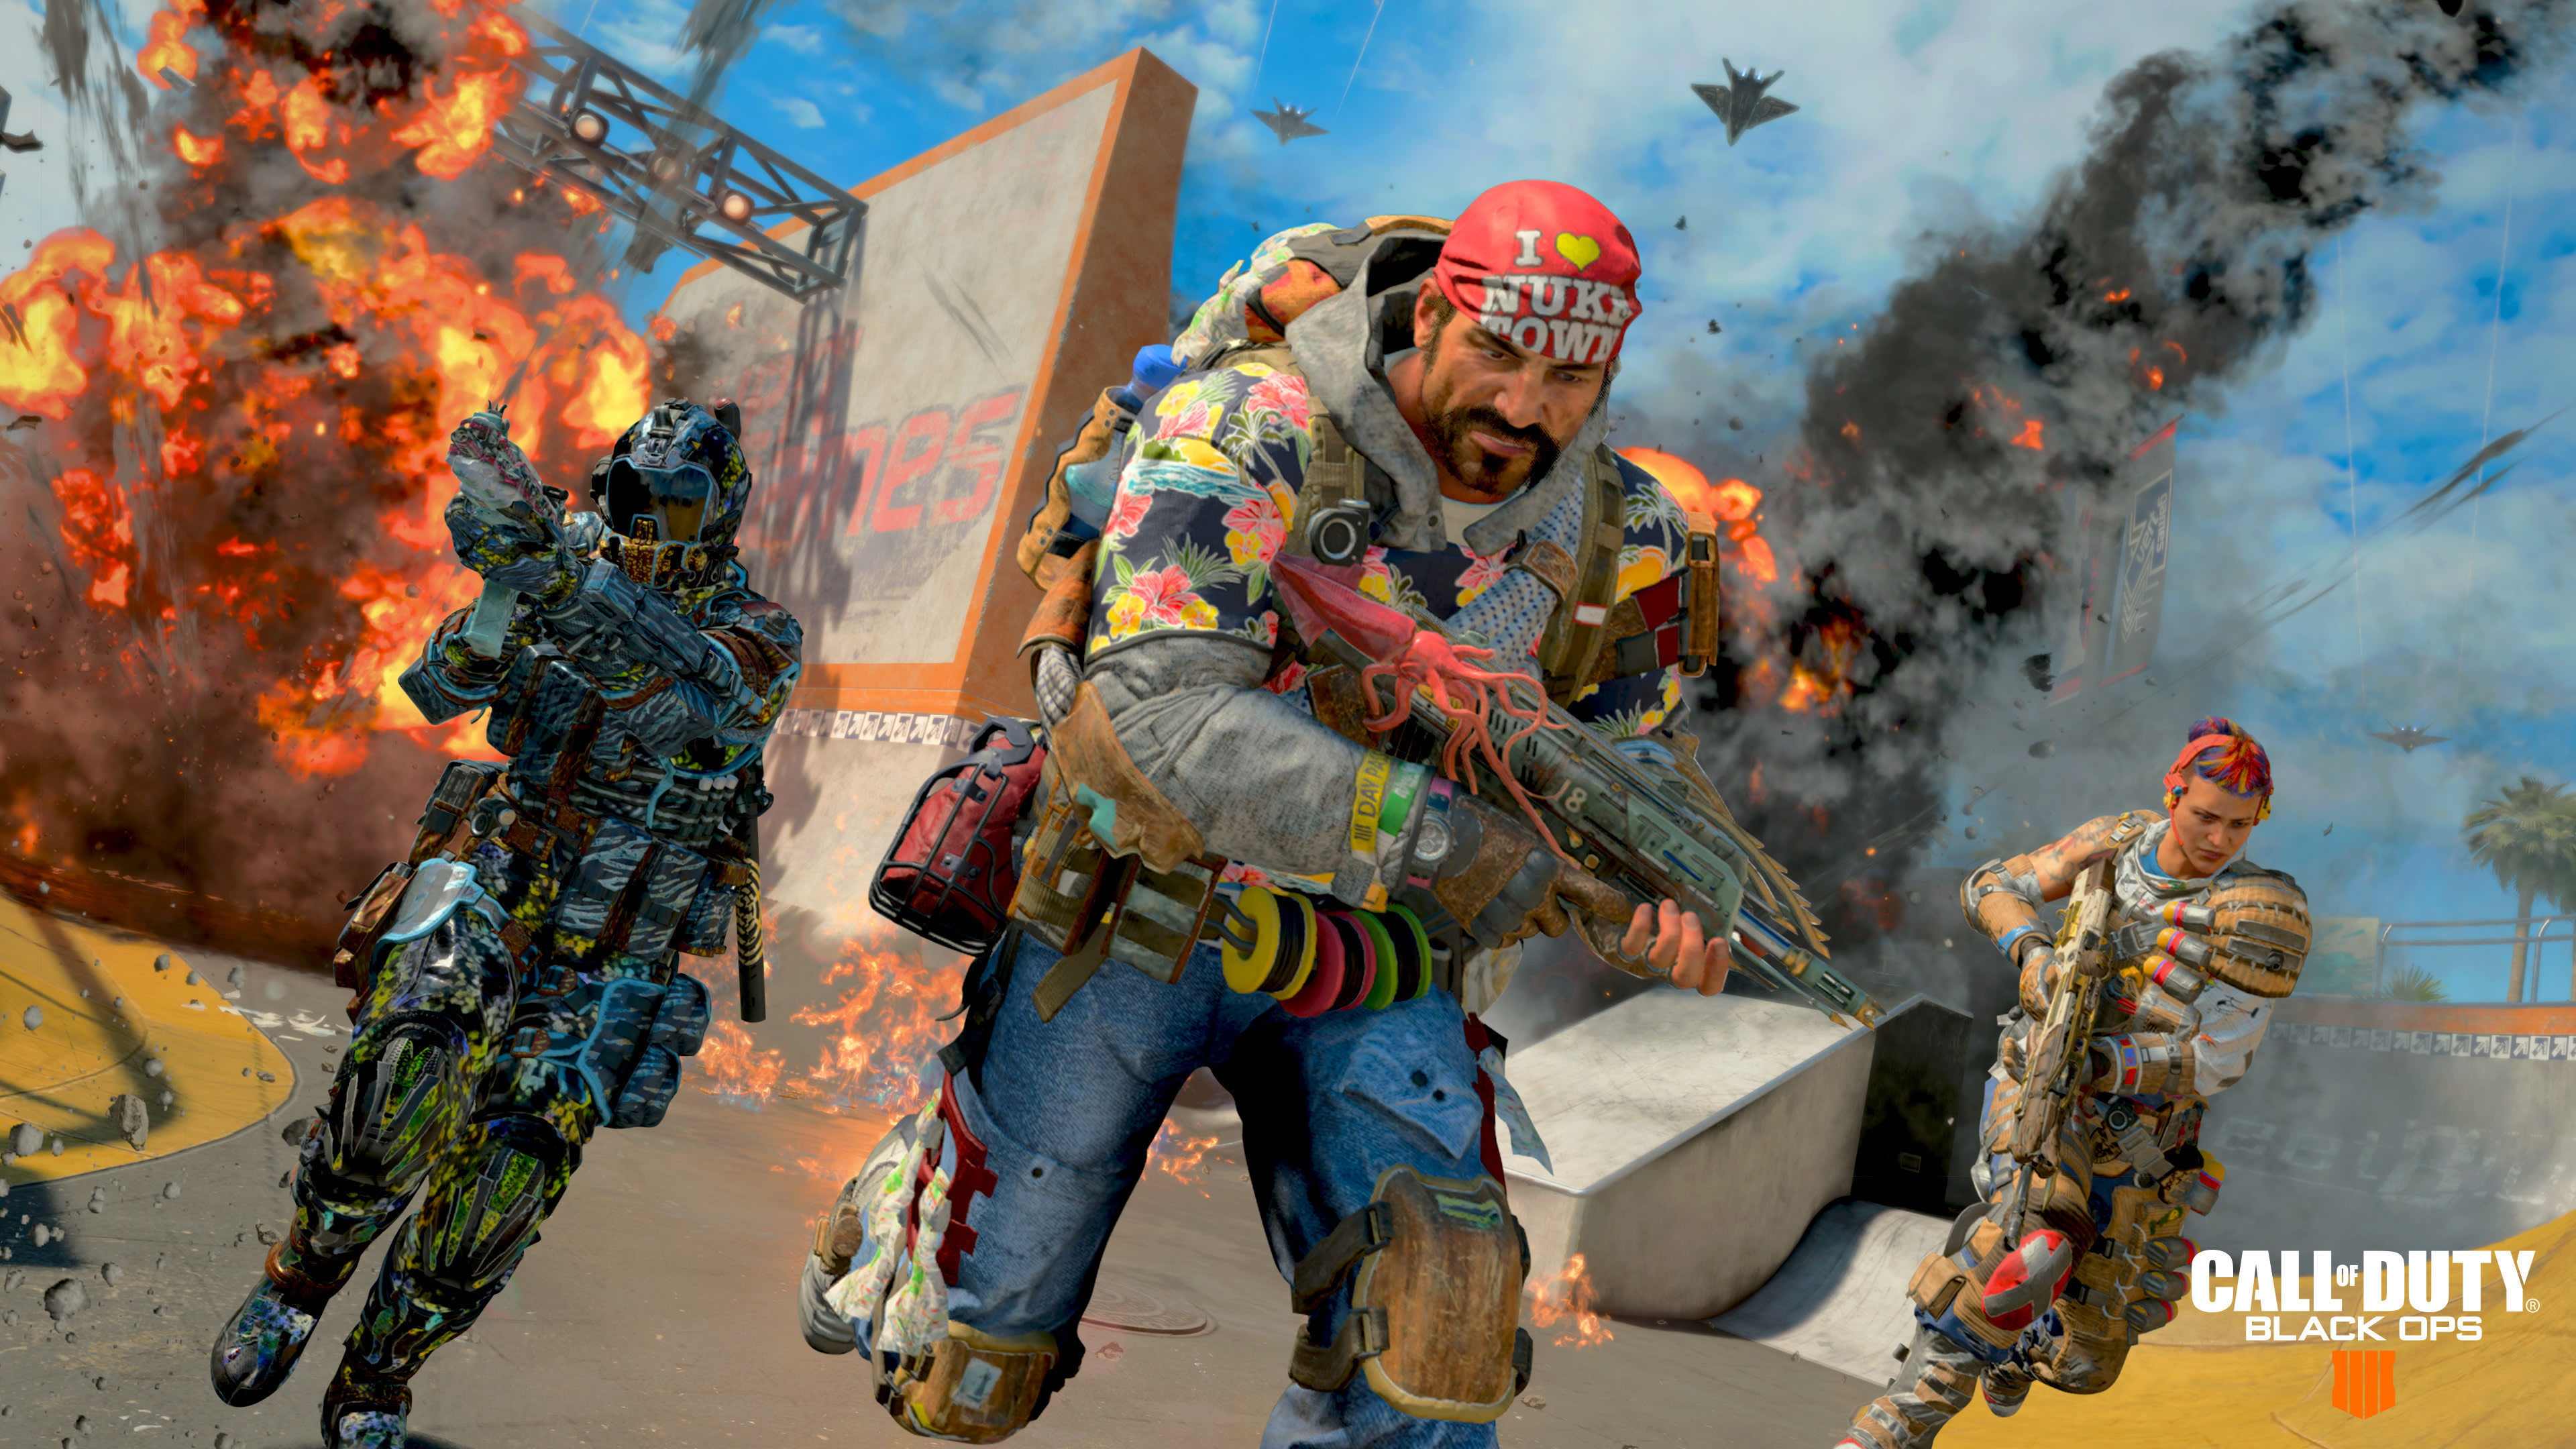 Call Of Duty Black Ops 4 3840x2160